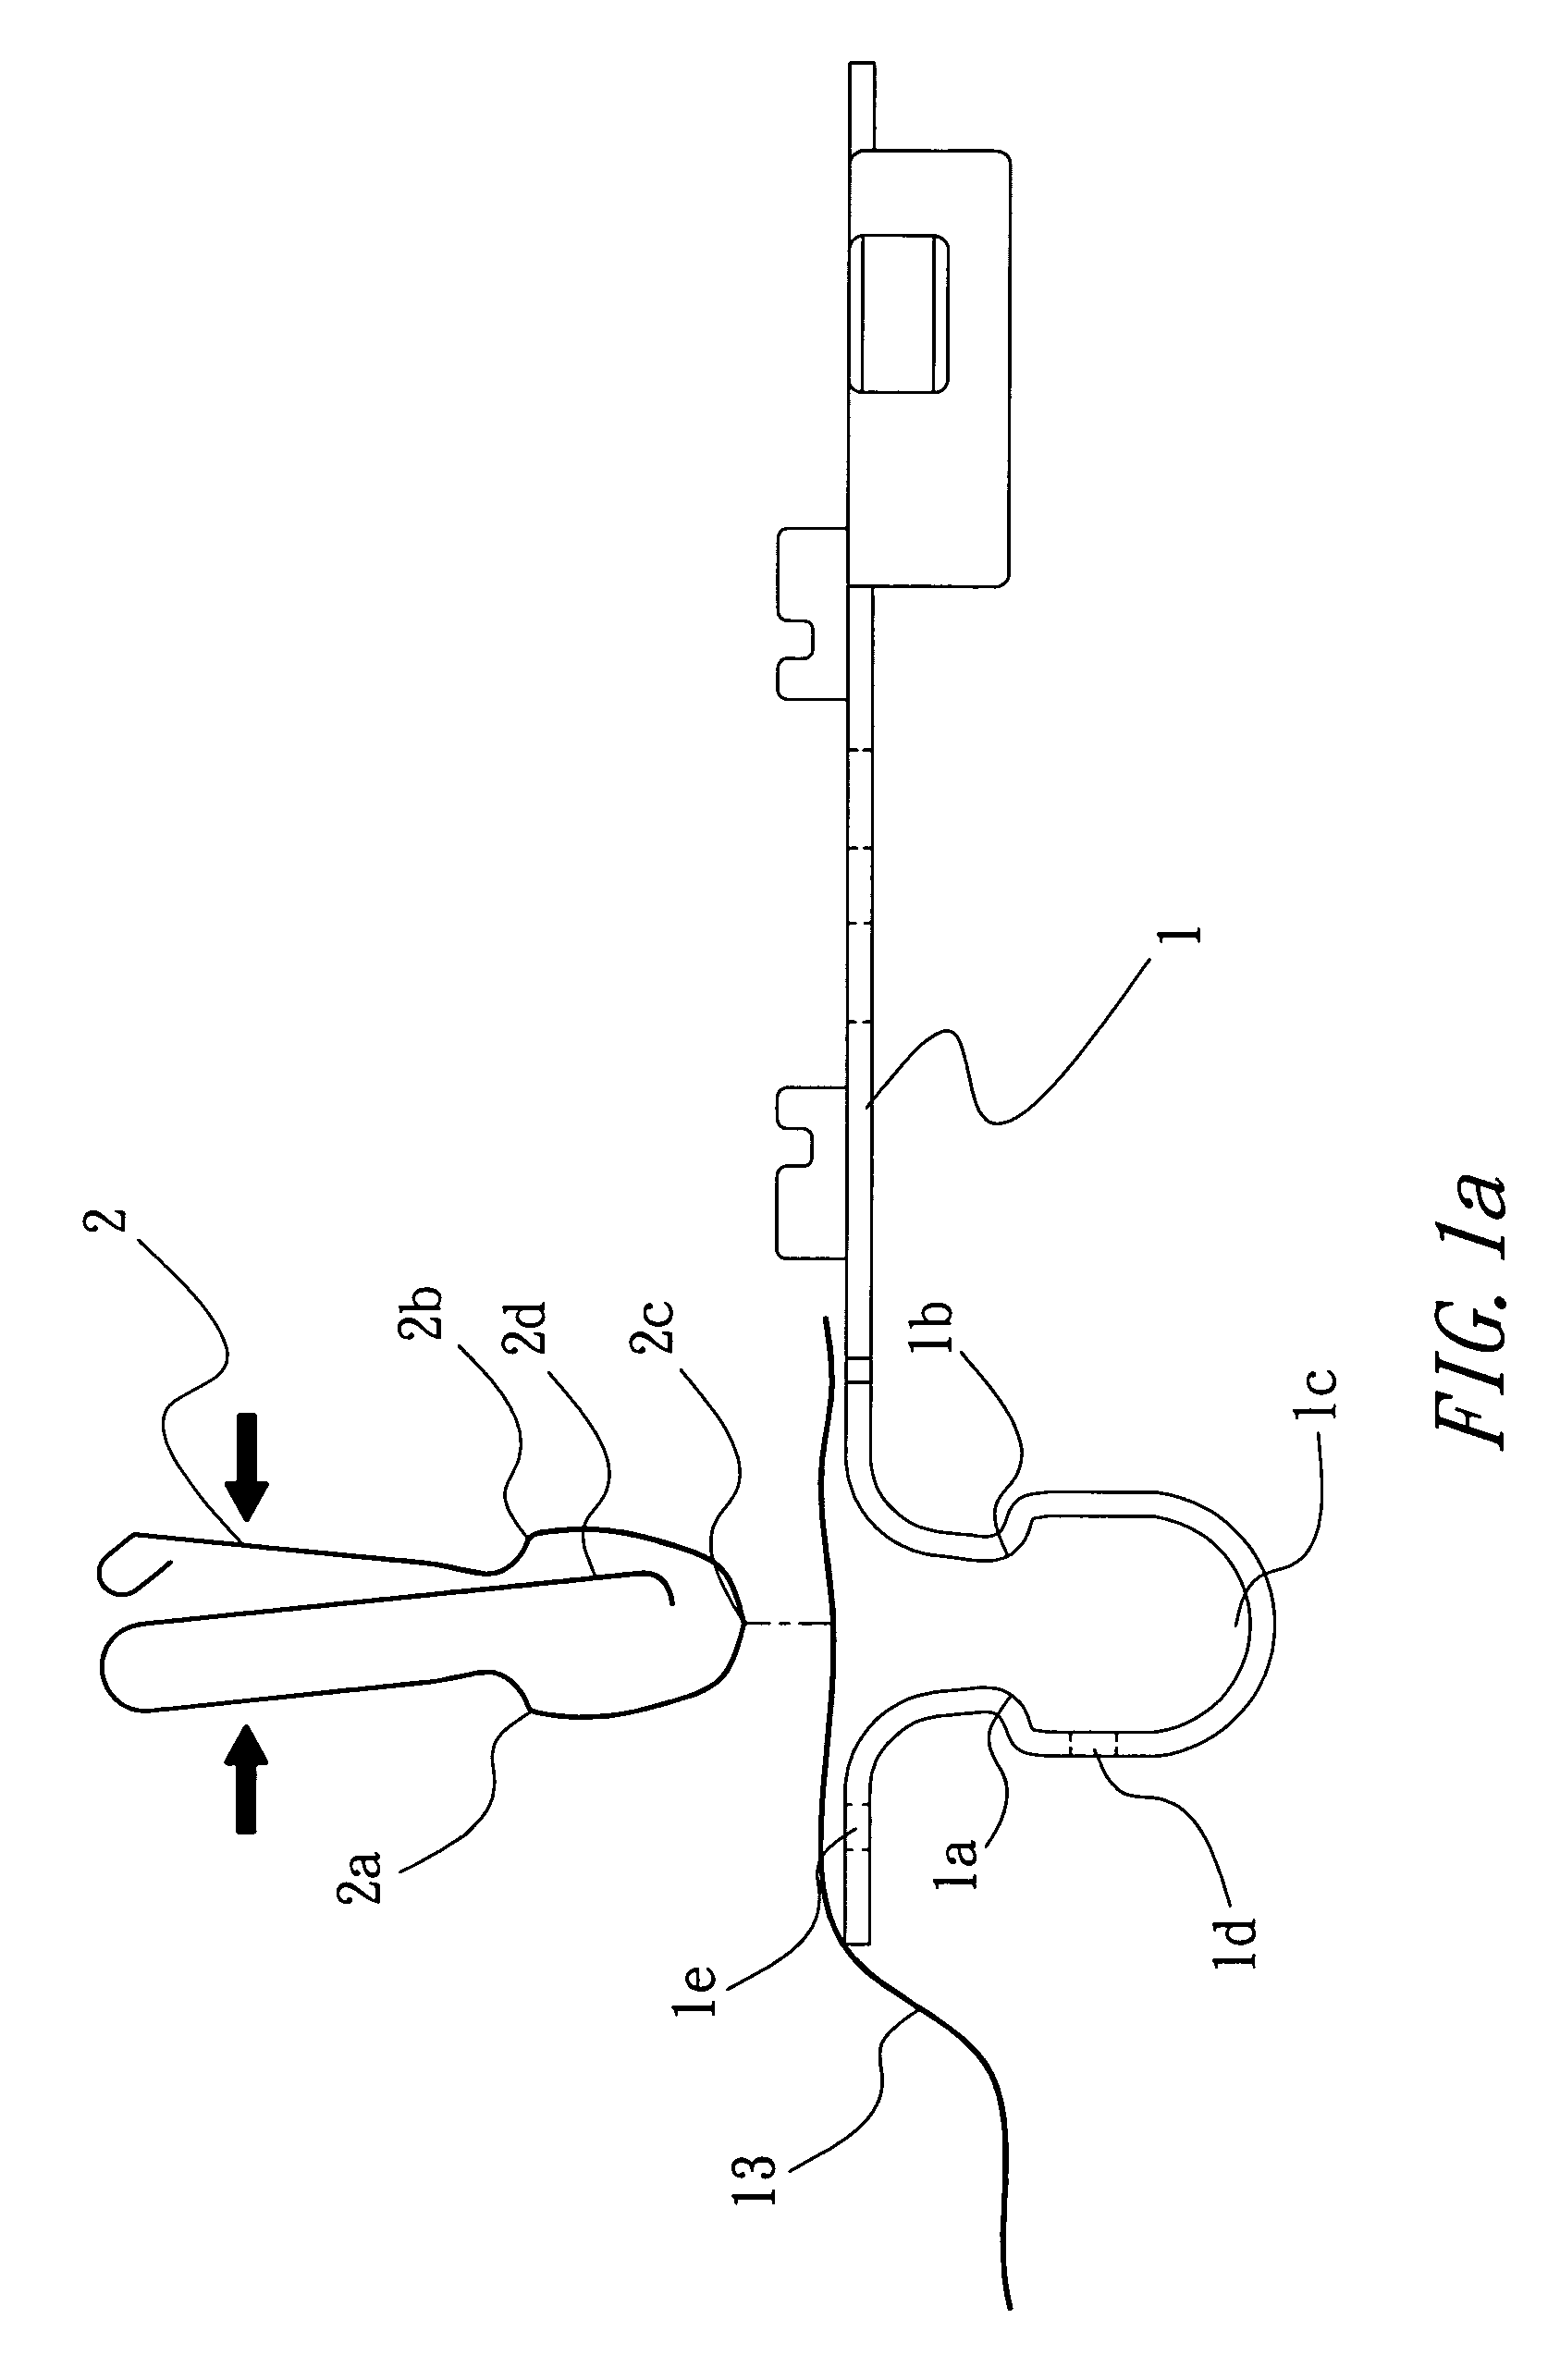 Plug-in wiring structure of optoelectronic device